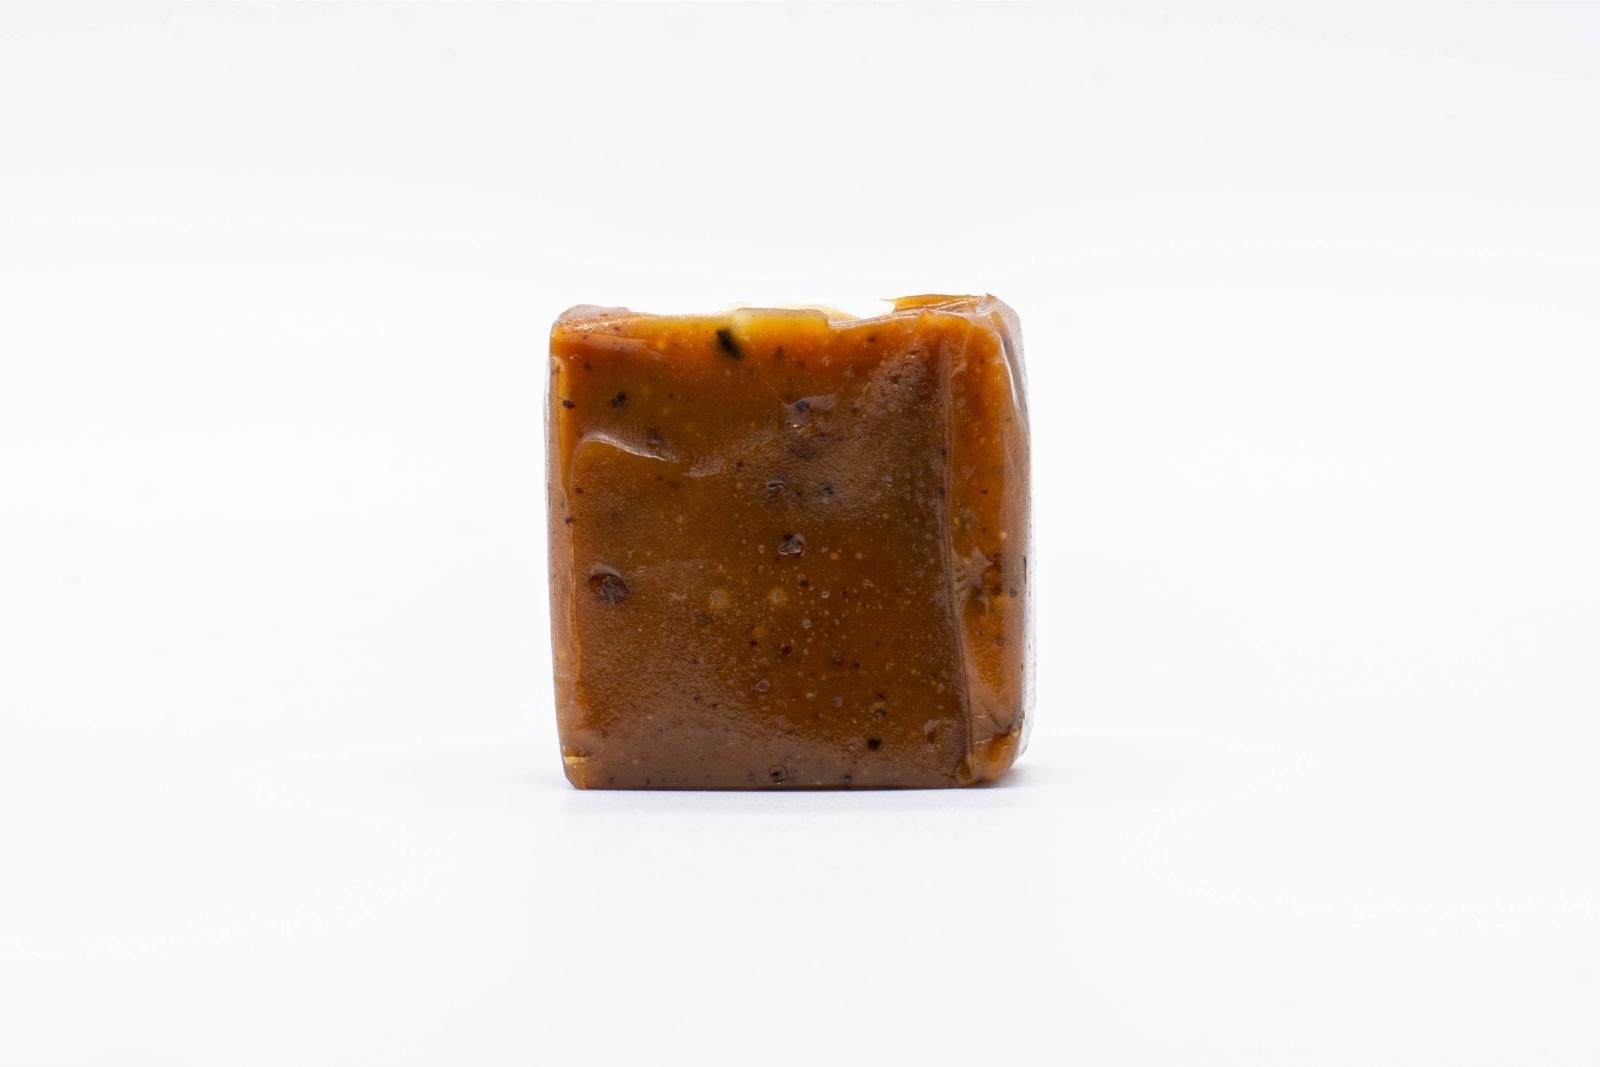 An unwrapped 2:1 Coffee Crunch Caramel by Seventh Hill CBD, on a white background